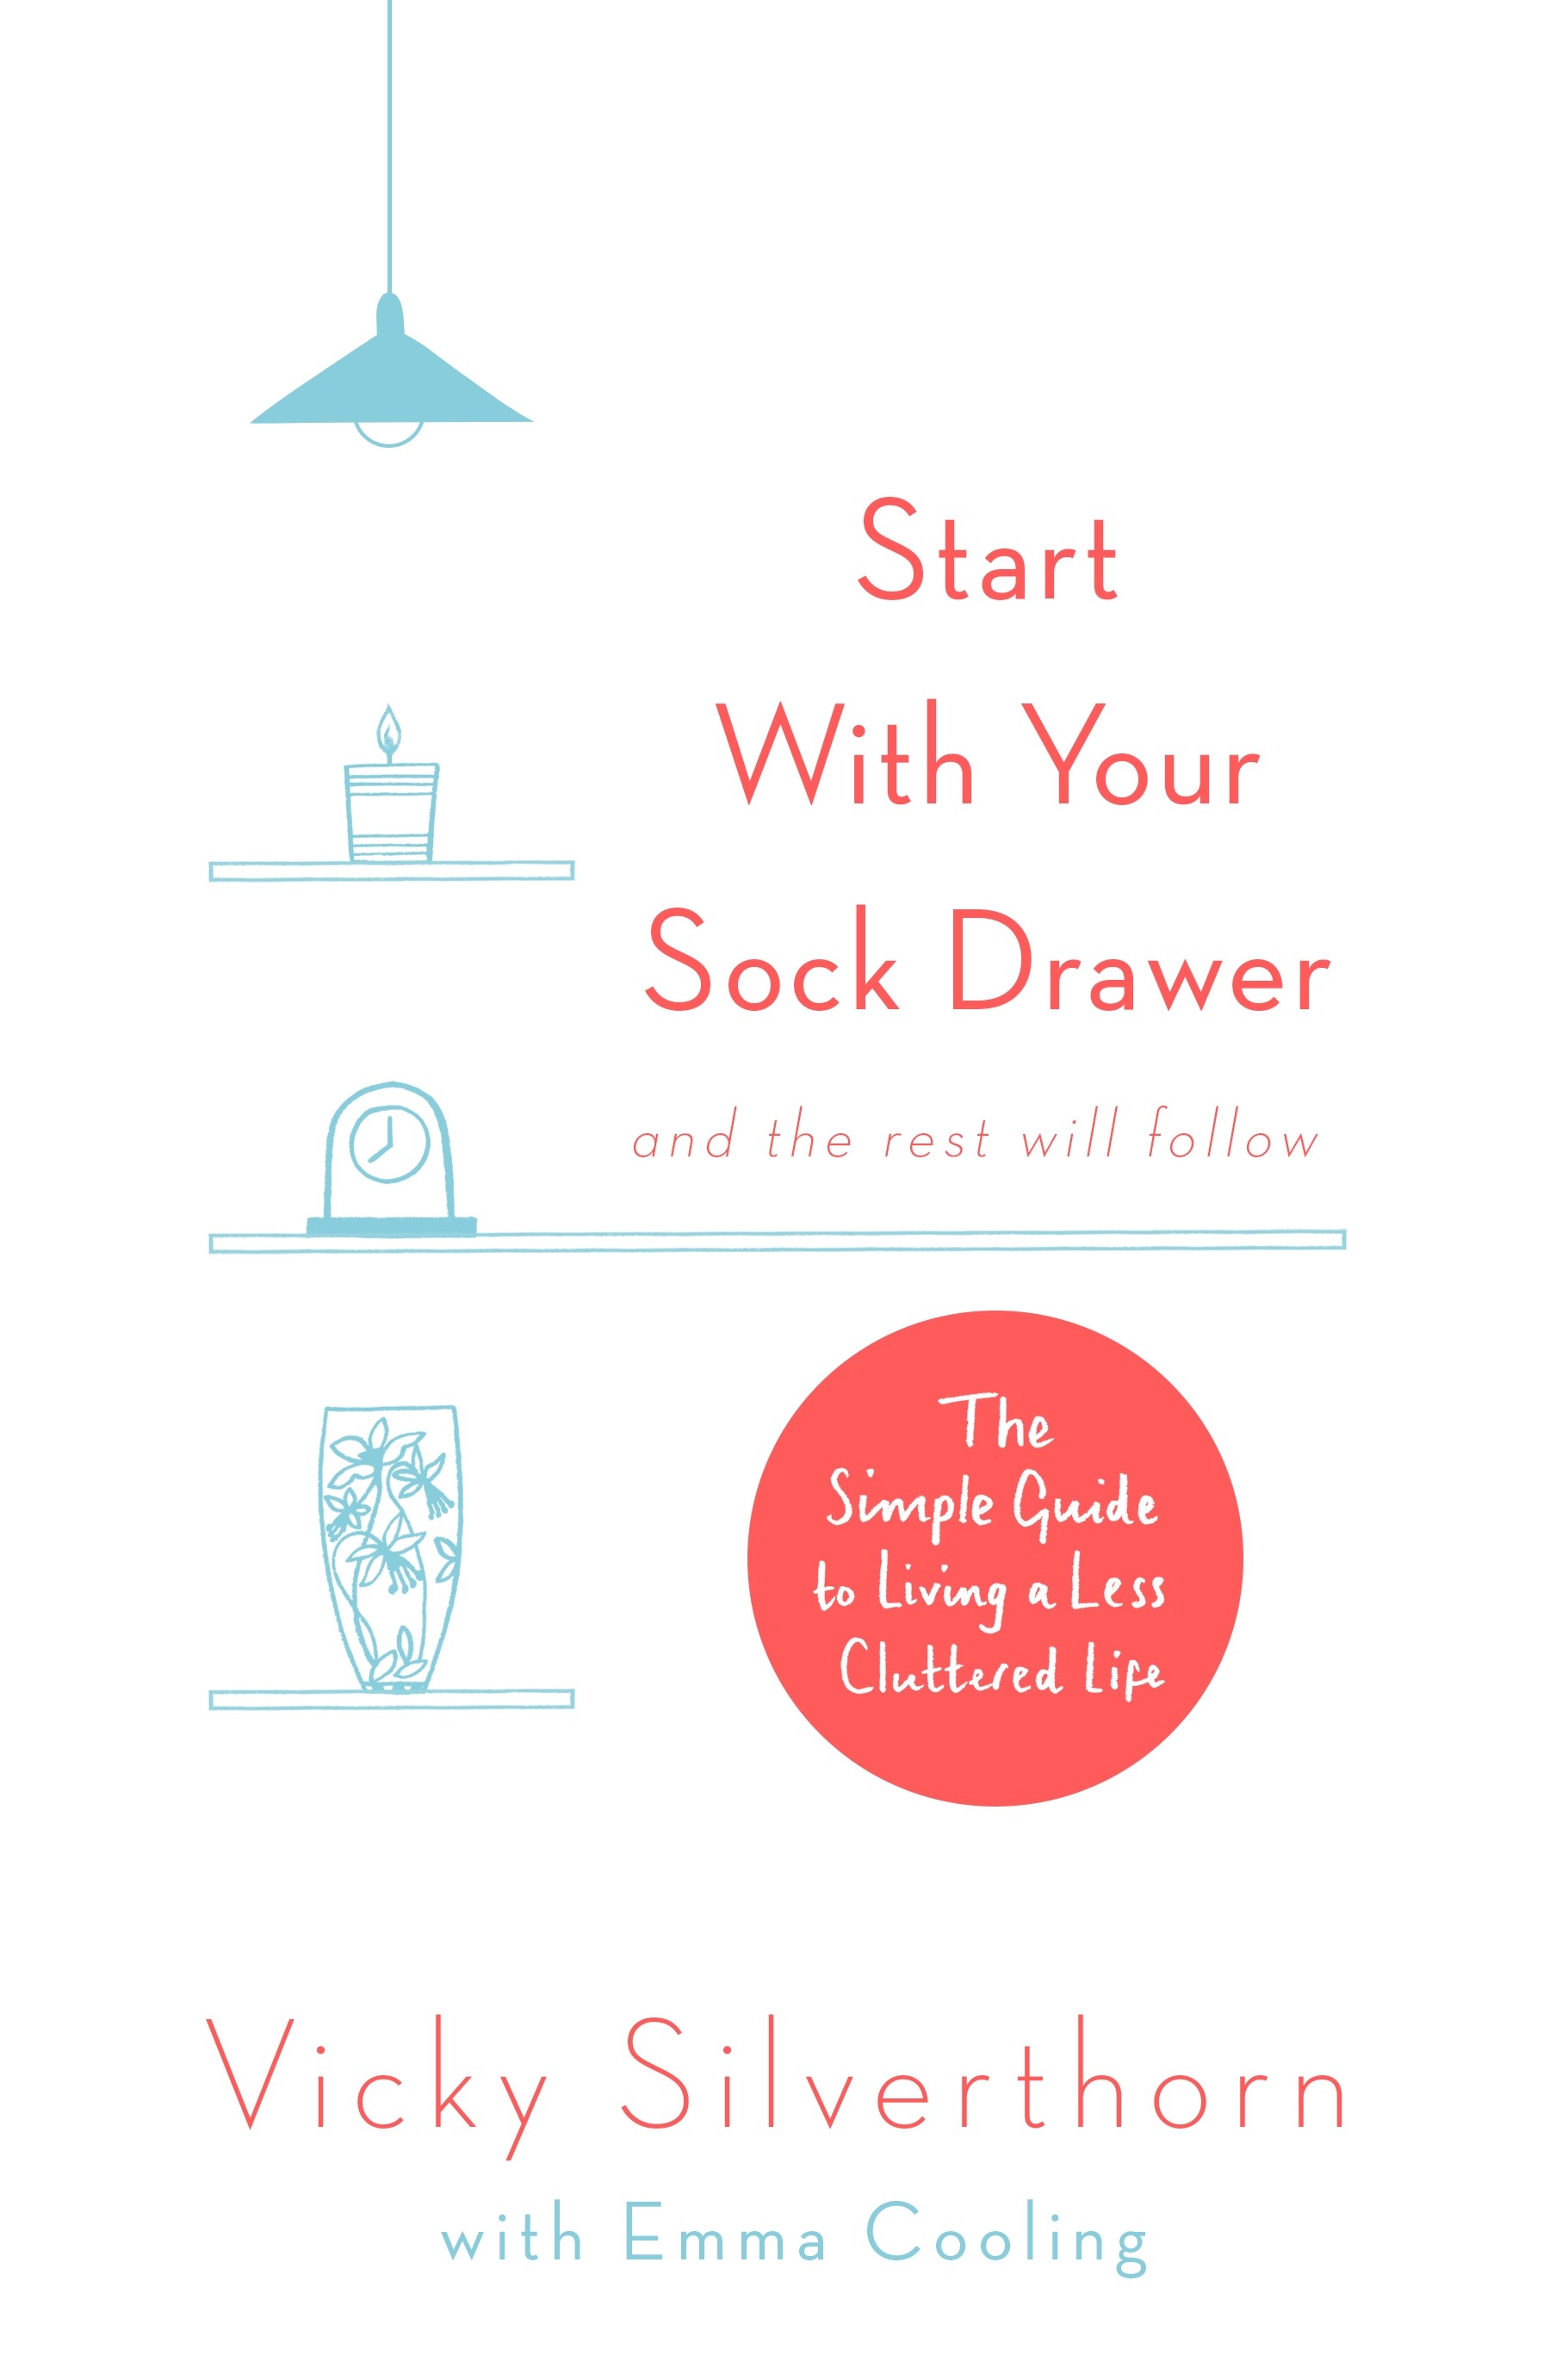 Start With Your Sock Drawer